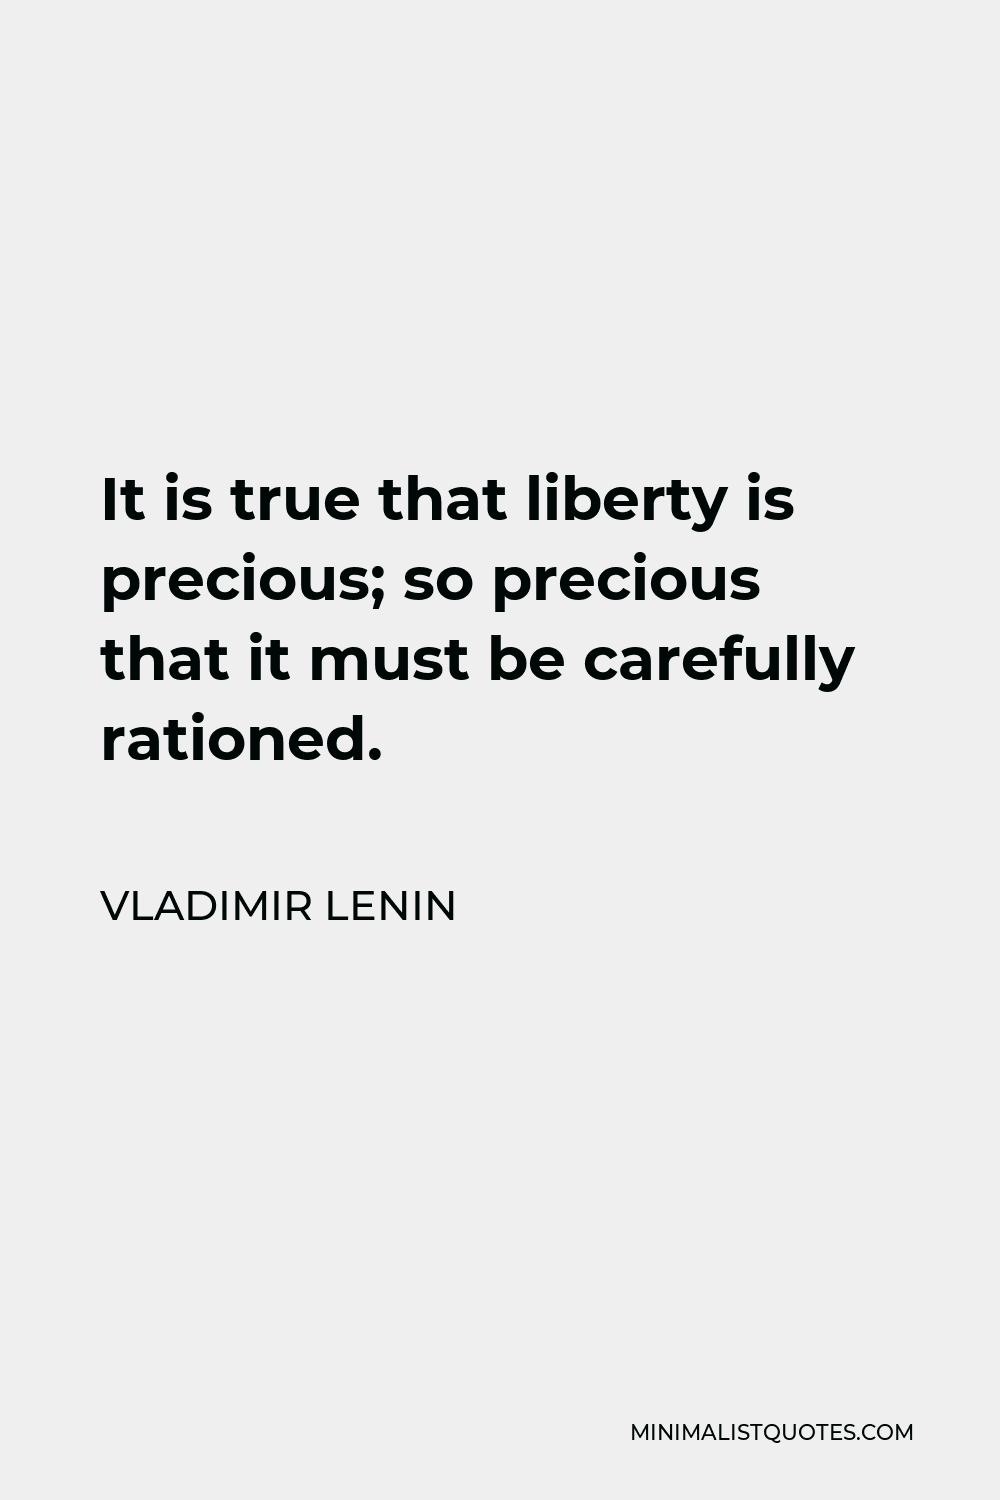 Vladimir Lenin Quote - It is true that liberty is precious; so precious that it must be carefully rationed.